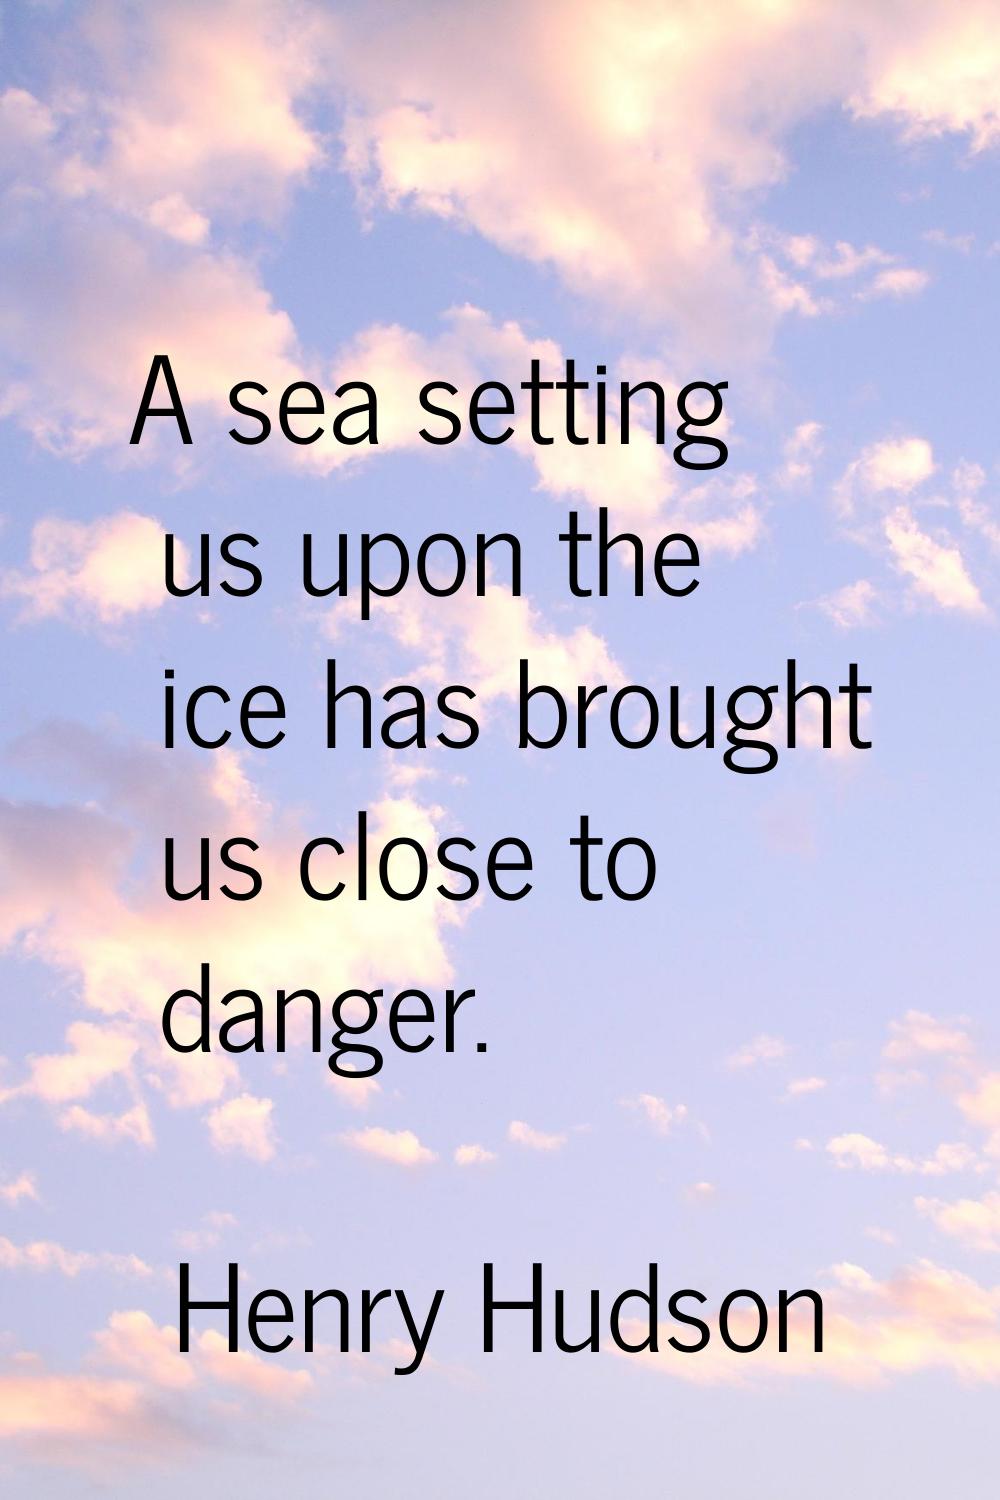 A sea setting us upon the ice has brought us close to danger.